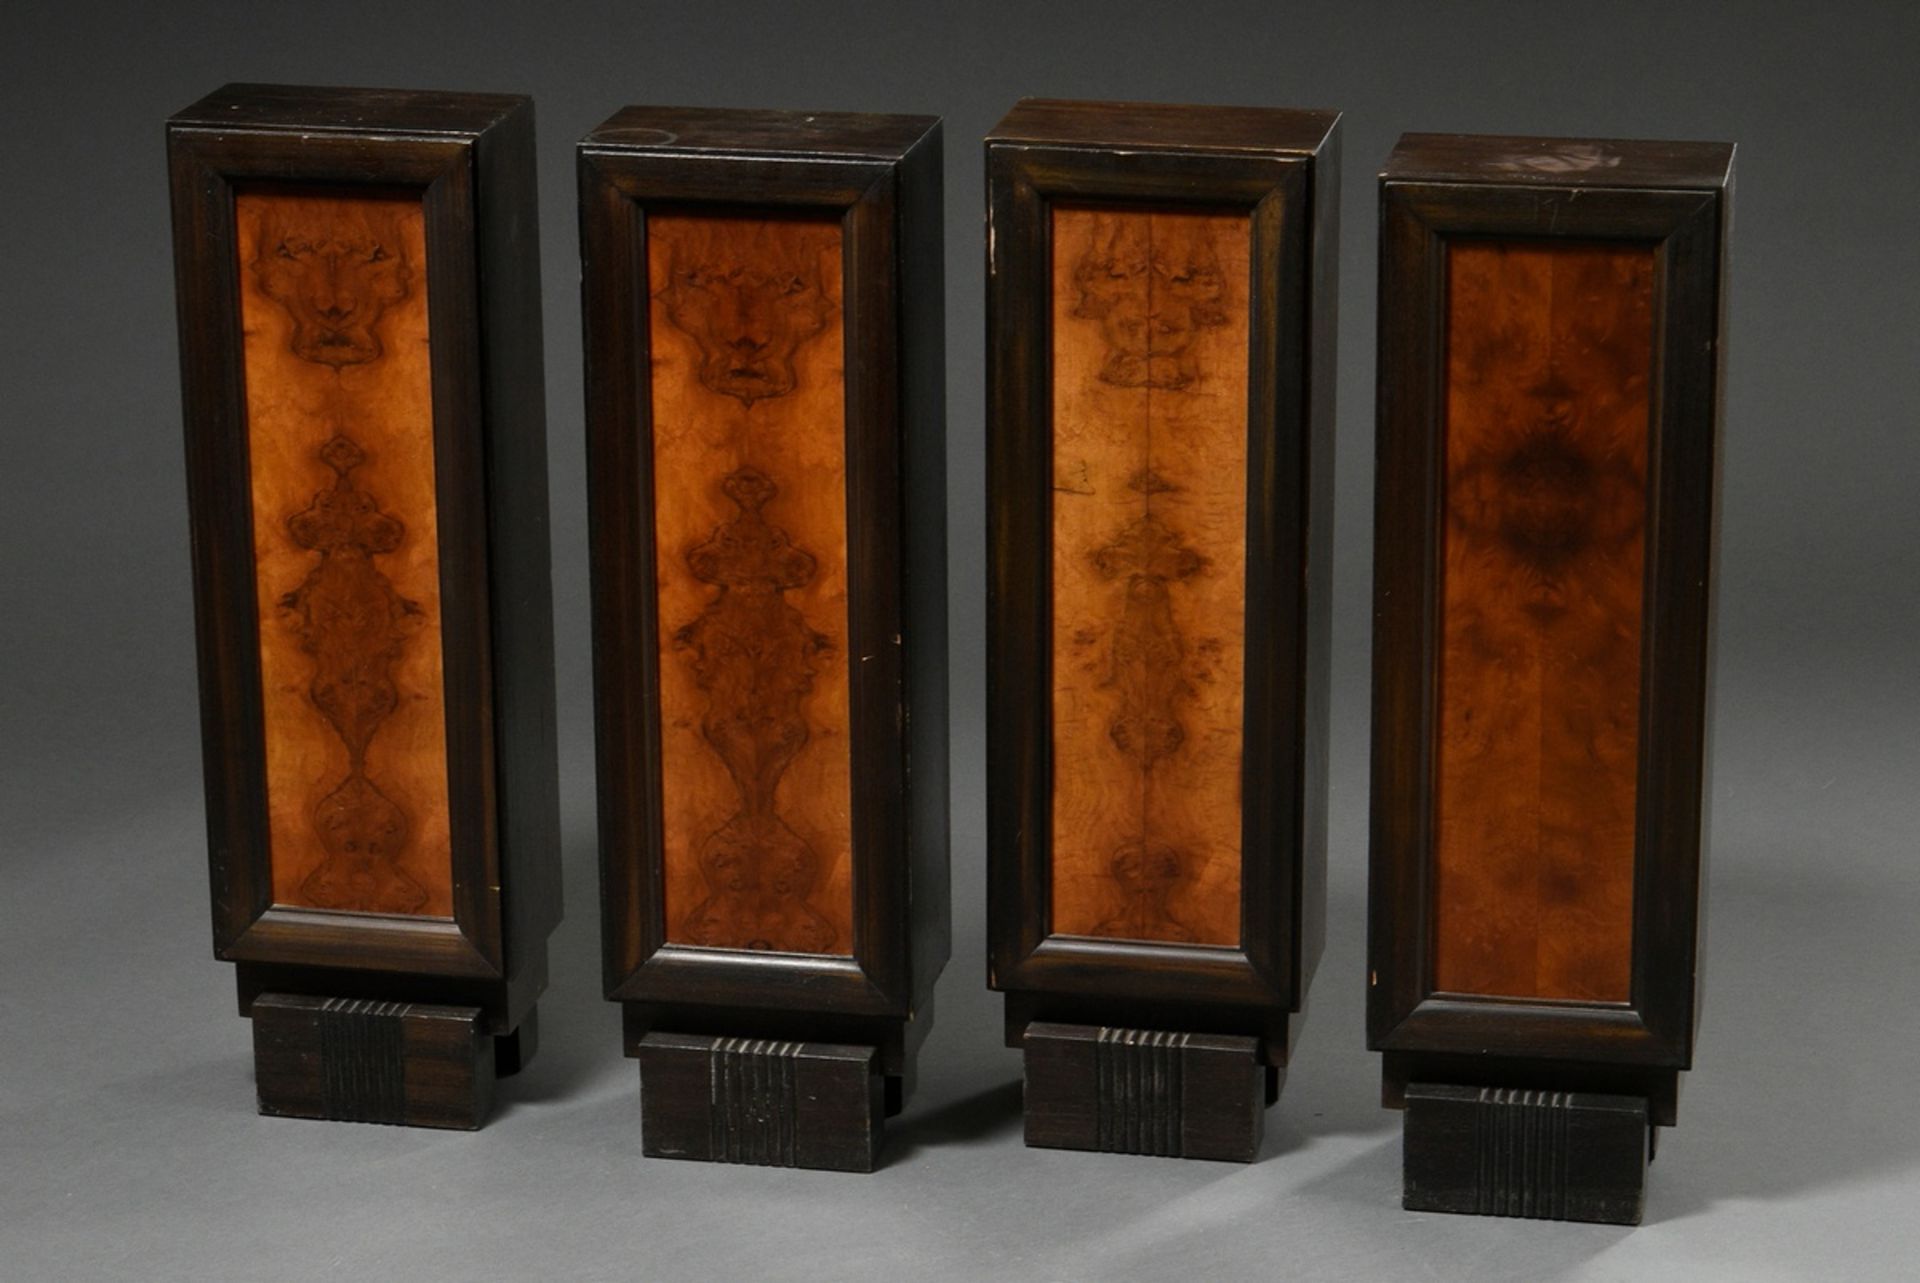 4 Small Art Deco sculptures postaments, dark stained wood with walnut inlays, 75x23x15cm, Provenanc